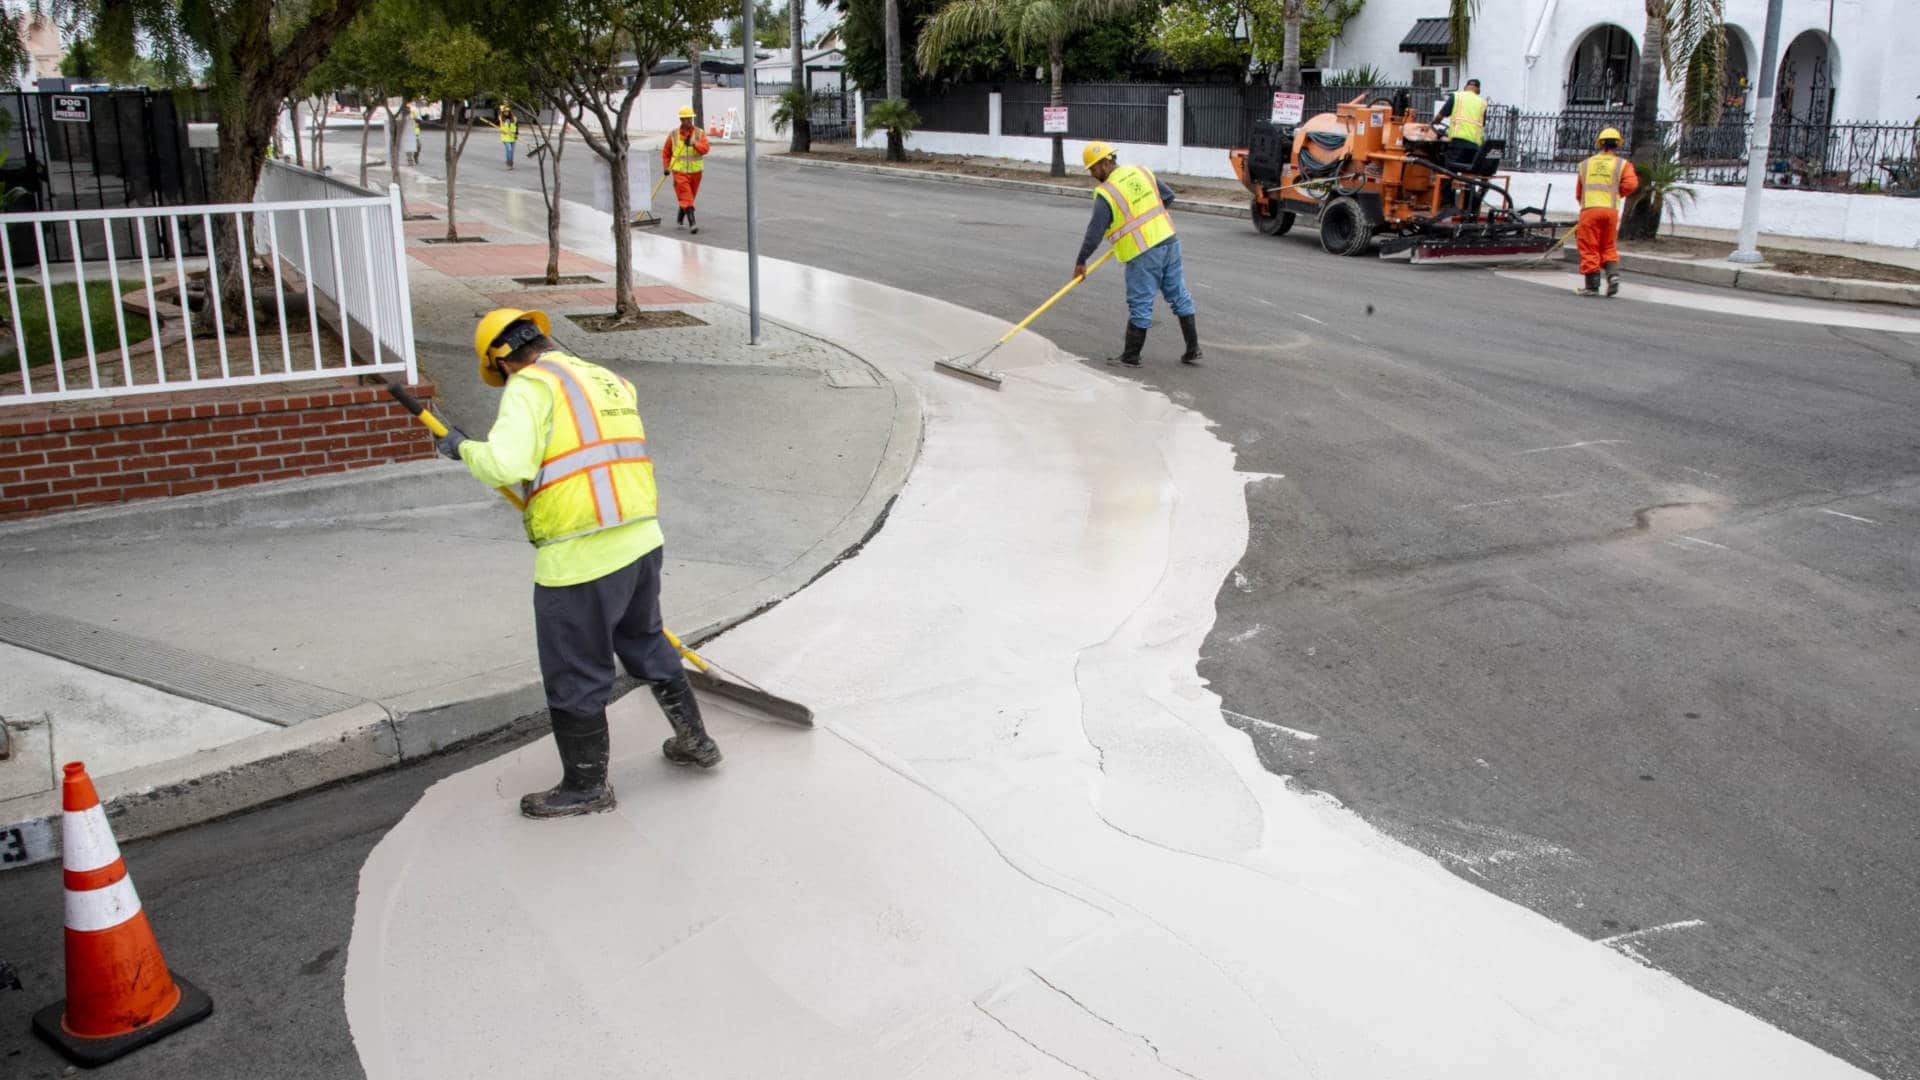 City workers apply a cooling paint on roads in Pacoima, Los Angeles.